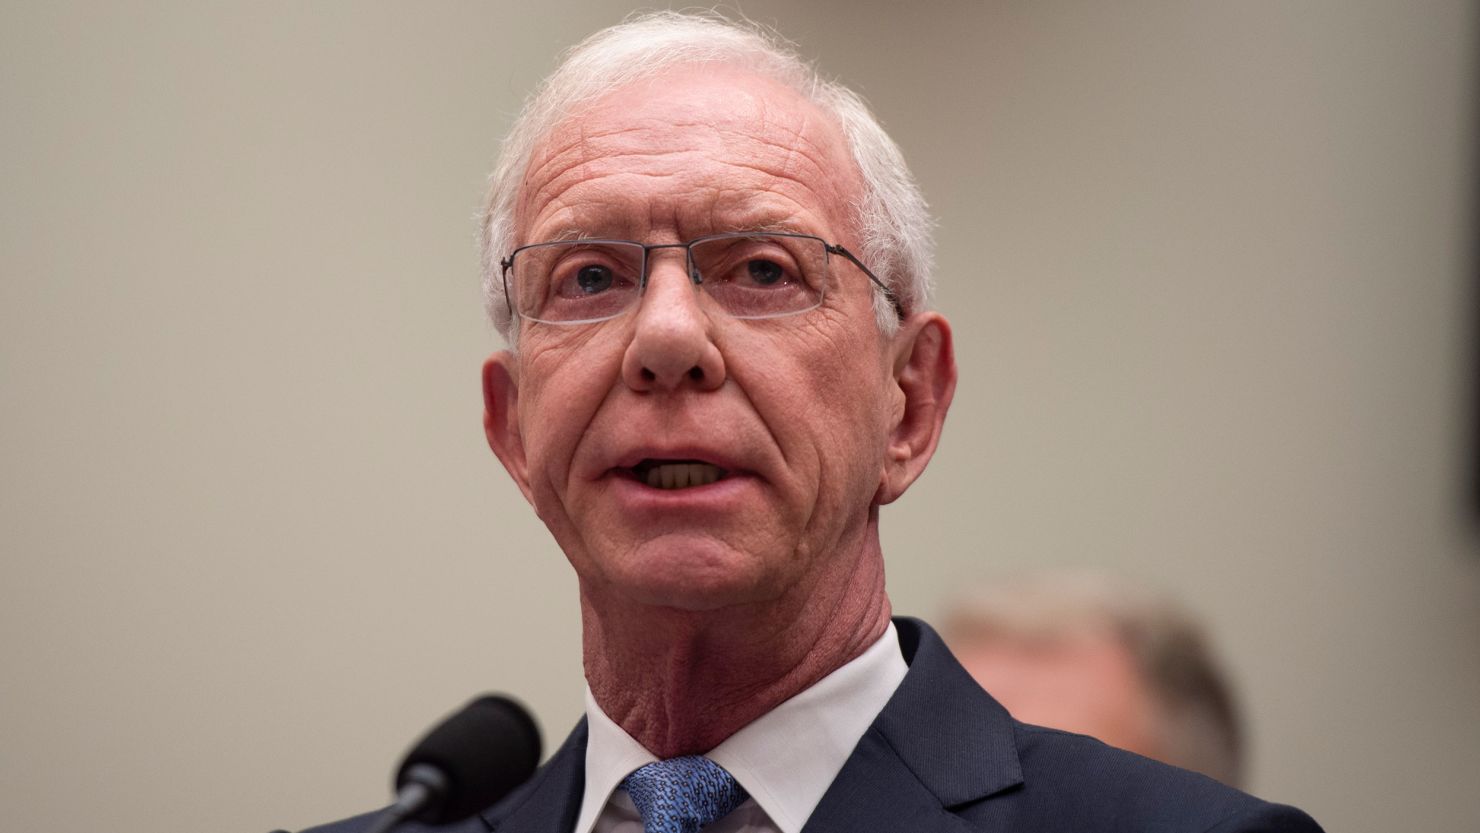 Former airline captain, Chesley "Sully" Sullenberger speaks during an aviation subcommittee hearing on "Status of the Boeing 737 MAX: Stakeholder Perspectives." at the Capitol in Washington, DC on June 19, 2019. ANDREW CABALLERO-REYNOLDS/AFP via Getty Images